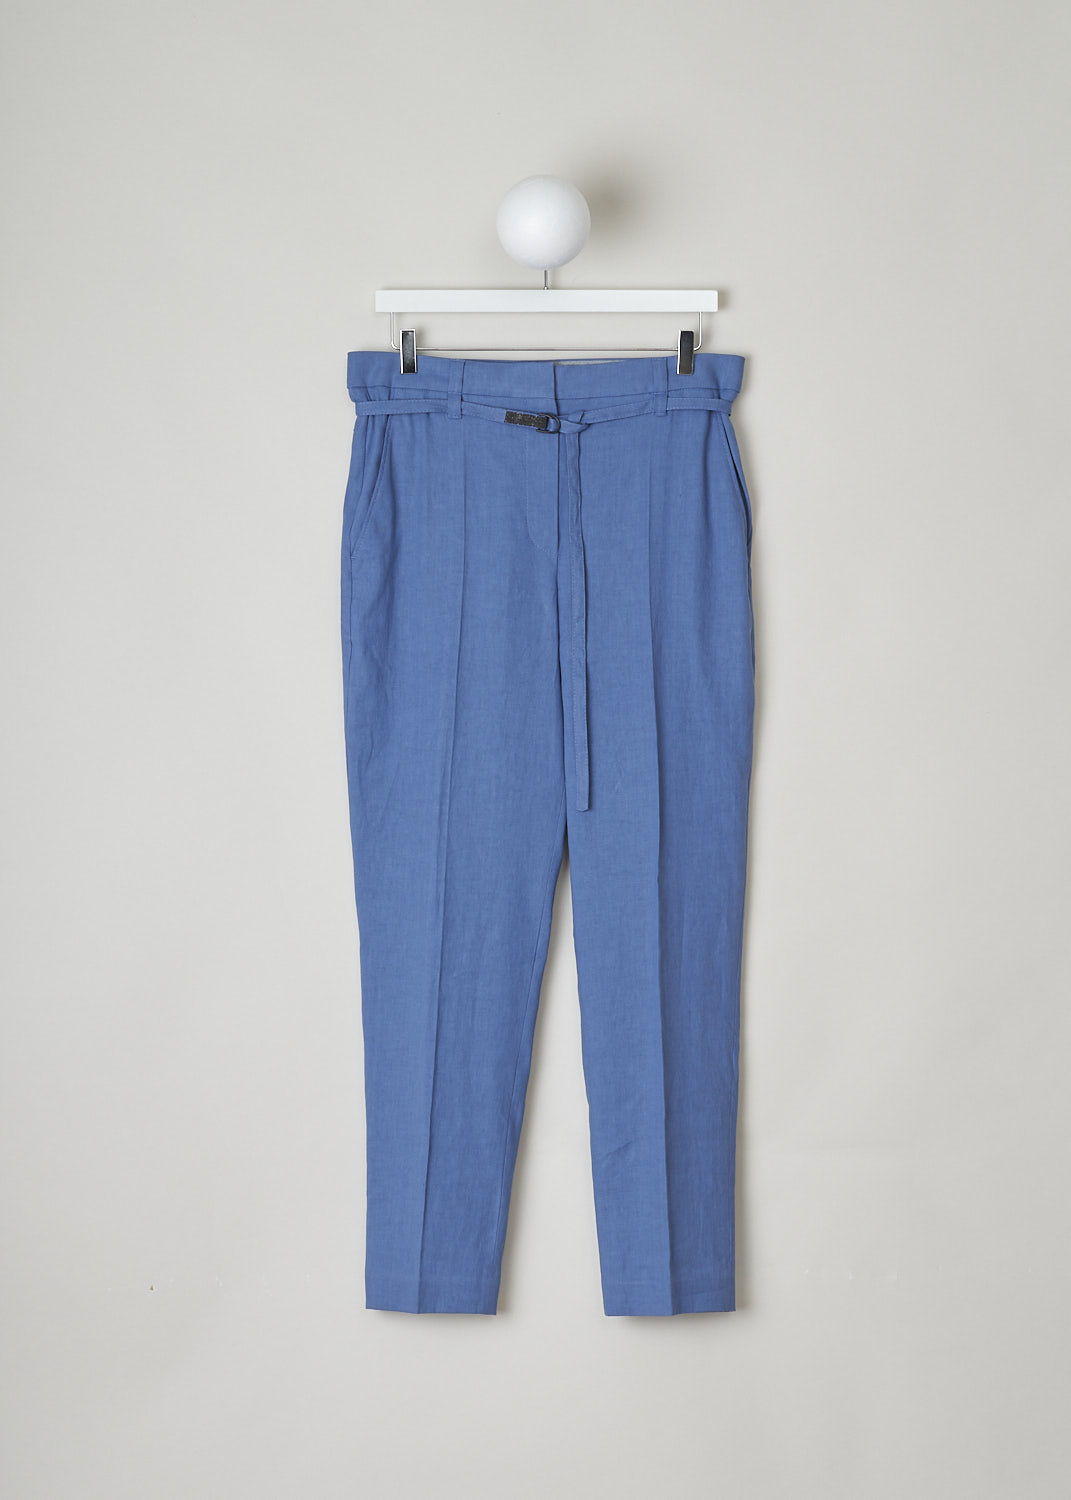 BRUNELLO CUCINELLI, BLUE LINEN PANTS WITH MATCHING BELT, MF591P7453_C8593, Blue, Front, These blue linen pants have a concealed clasp and zipper closure and a matching fabric belt with a double D-ring buckle. The belt is subtly decorated with Monilli beads. These pants have a pleated front and tapered pant legs with centre creases. In the front, slanted pockets can be found. In the back, these pants have welt pockets. 
